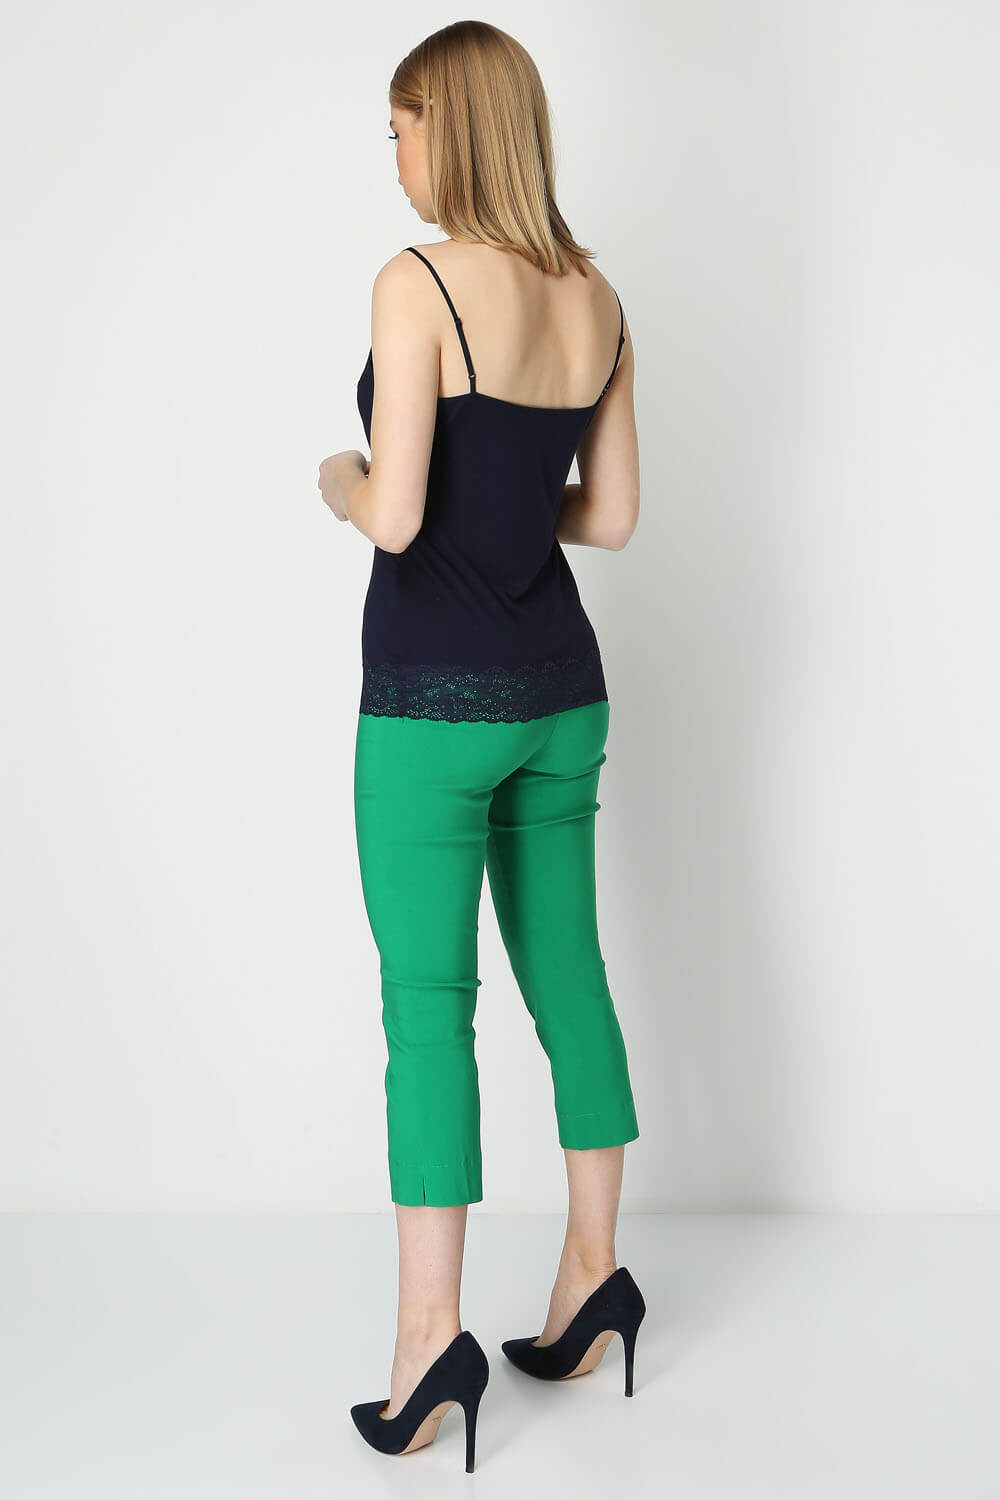 Navy  Lace Trim Camisole Top, Image 3 of 5